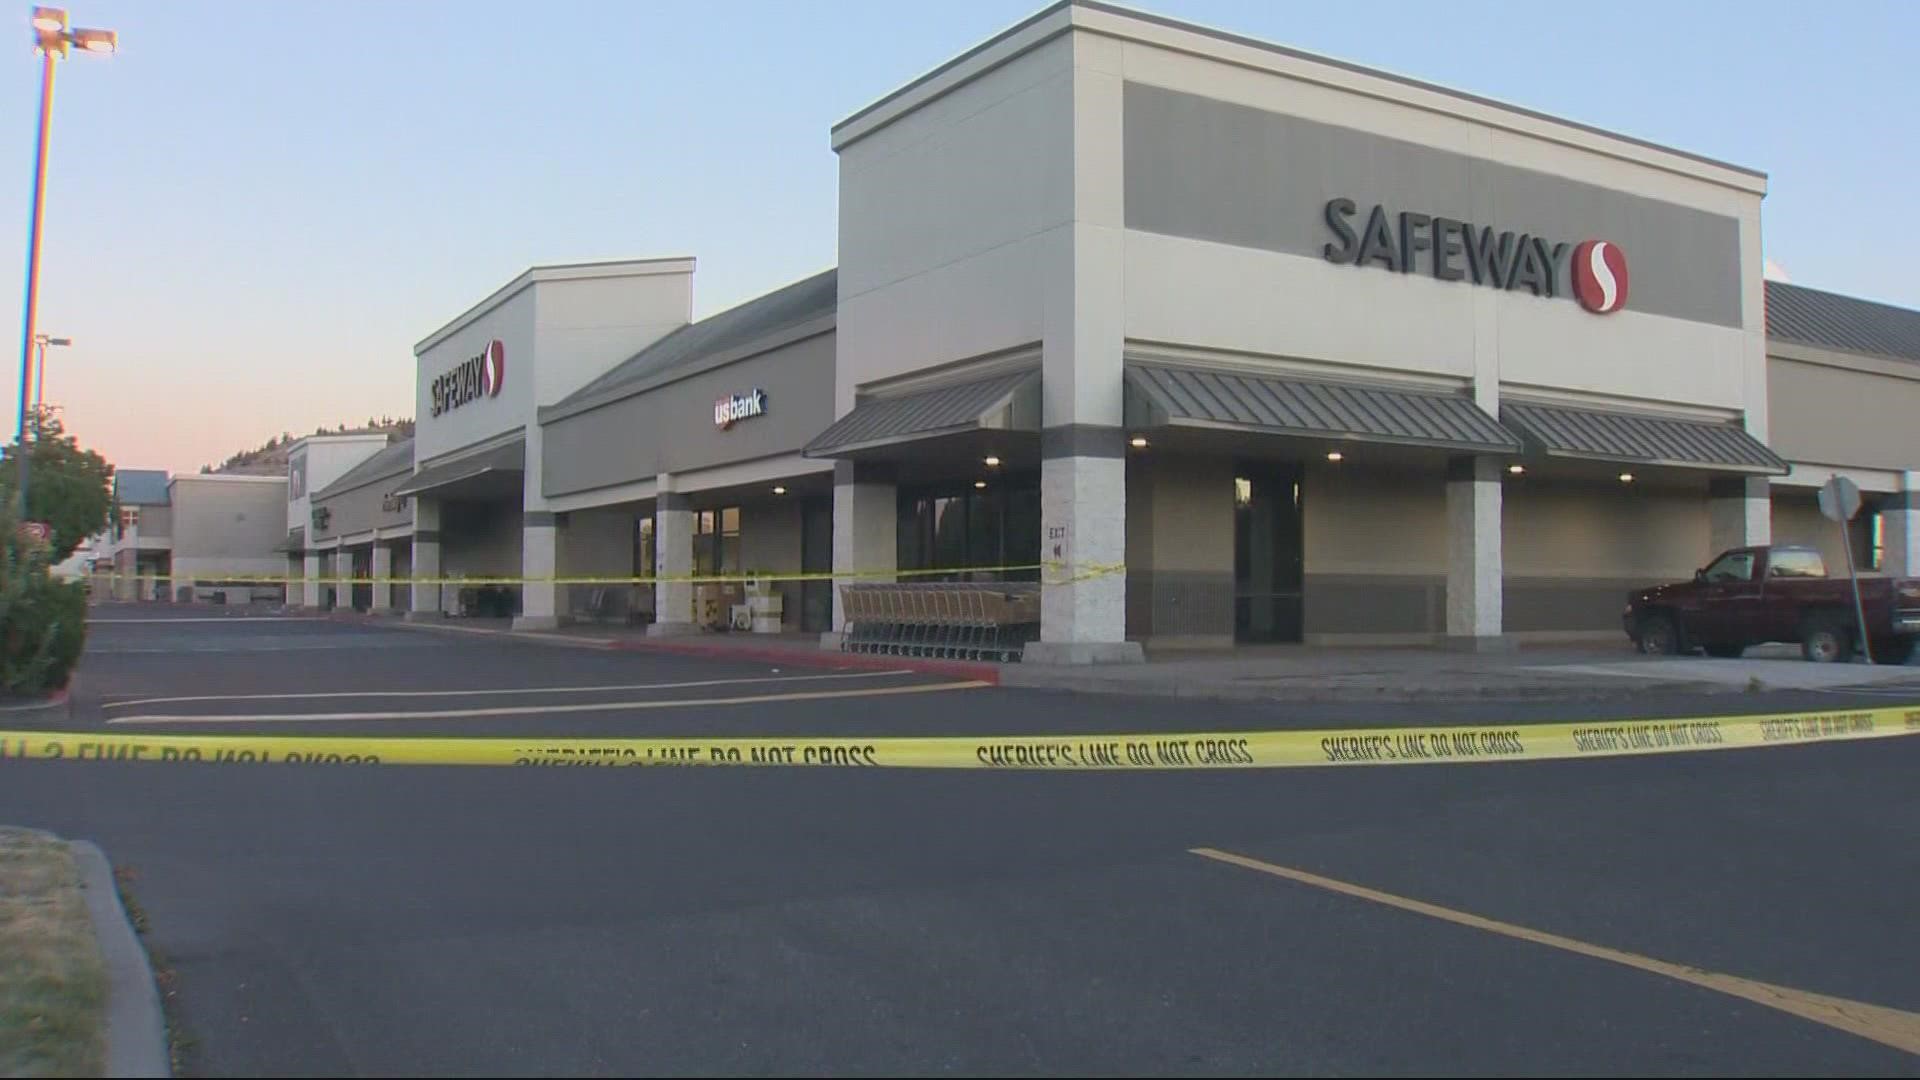 Investigators said it could've been worse than it was if not for the heroic actions of a Safeway employee.